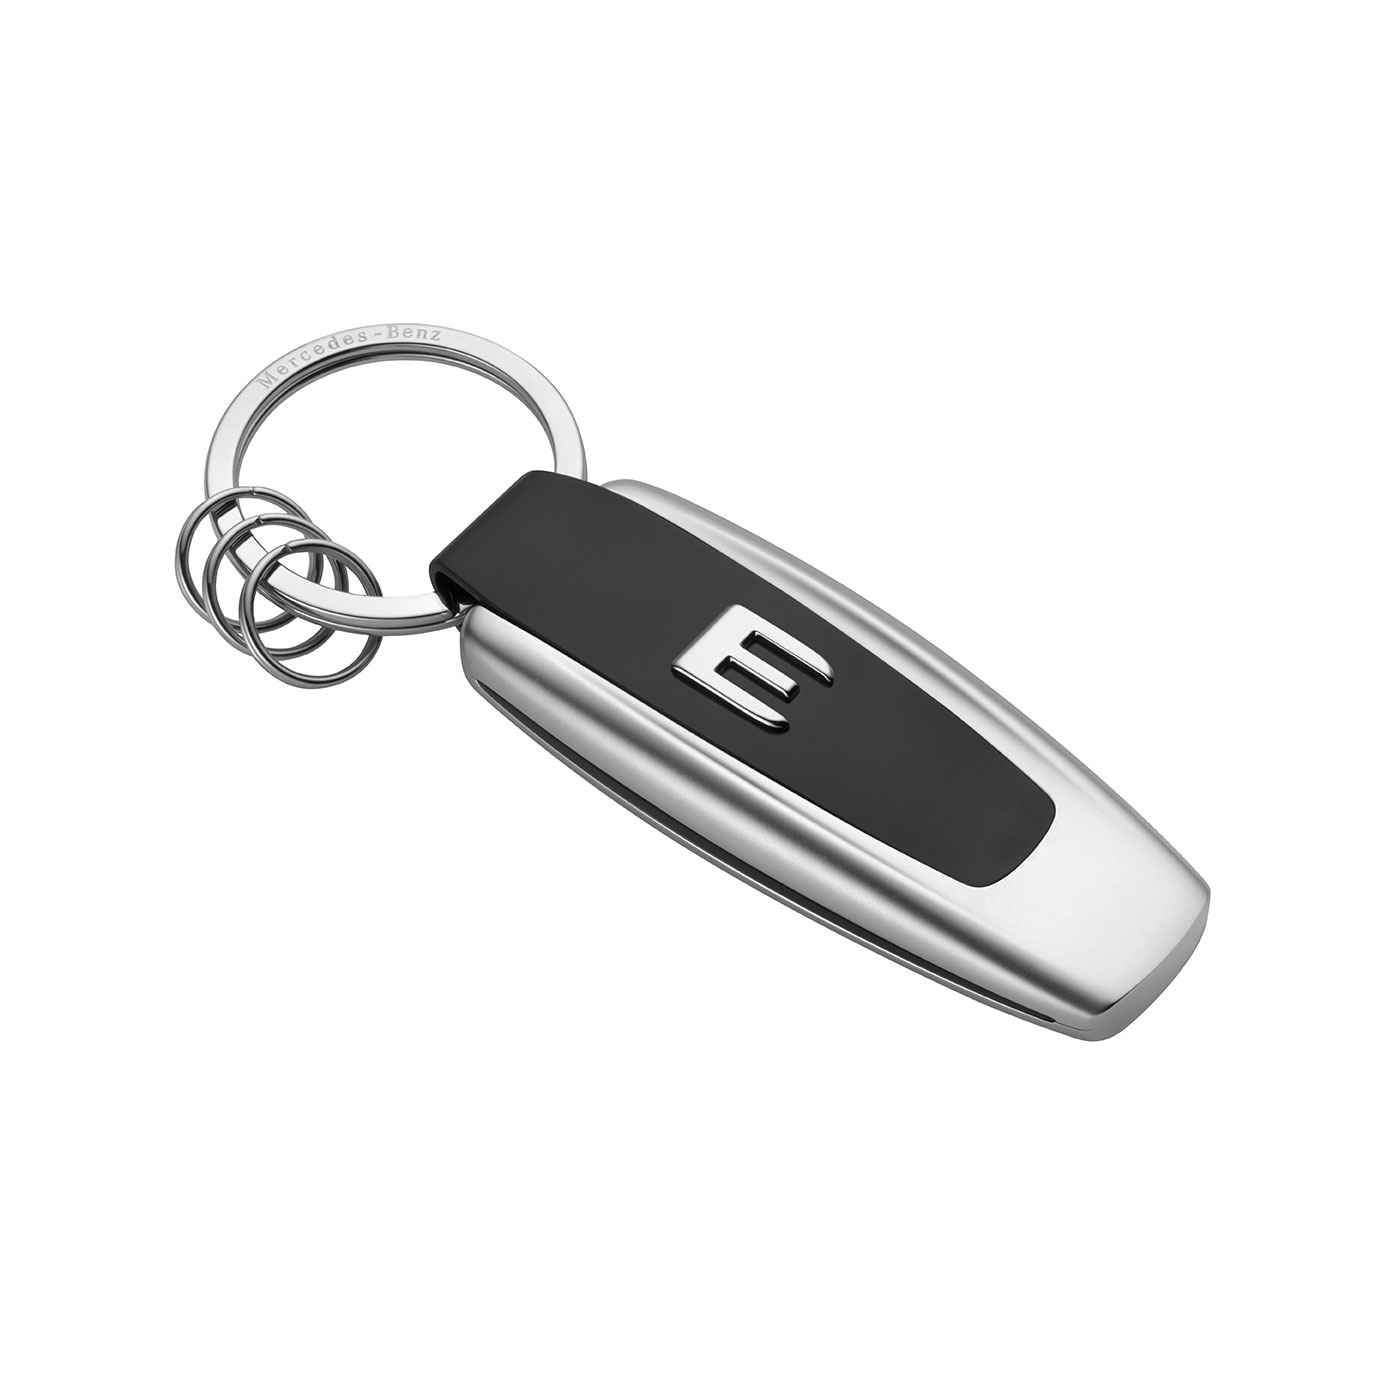 Keycare Italian leather key cover for Mercedes Benz: C E M S CLS CLK G